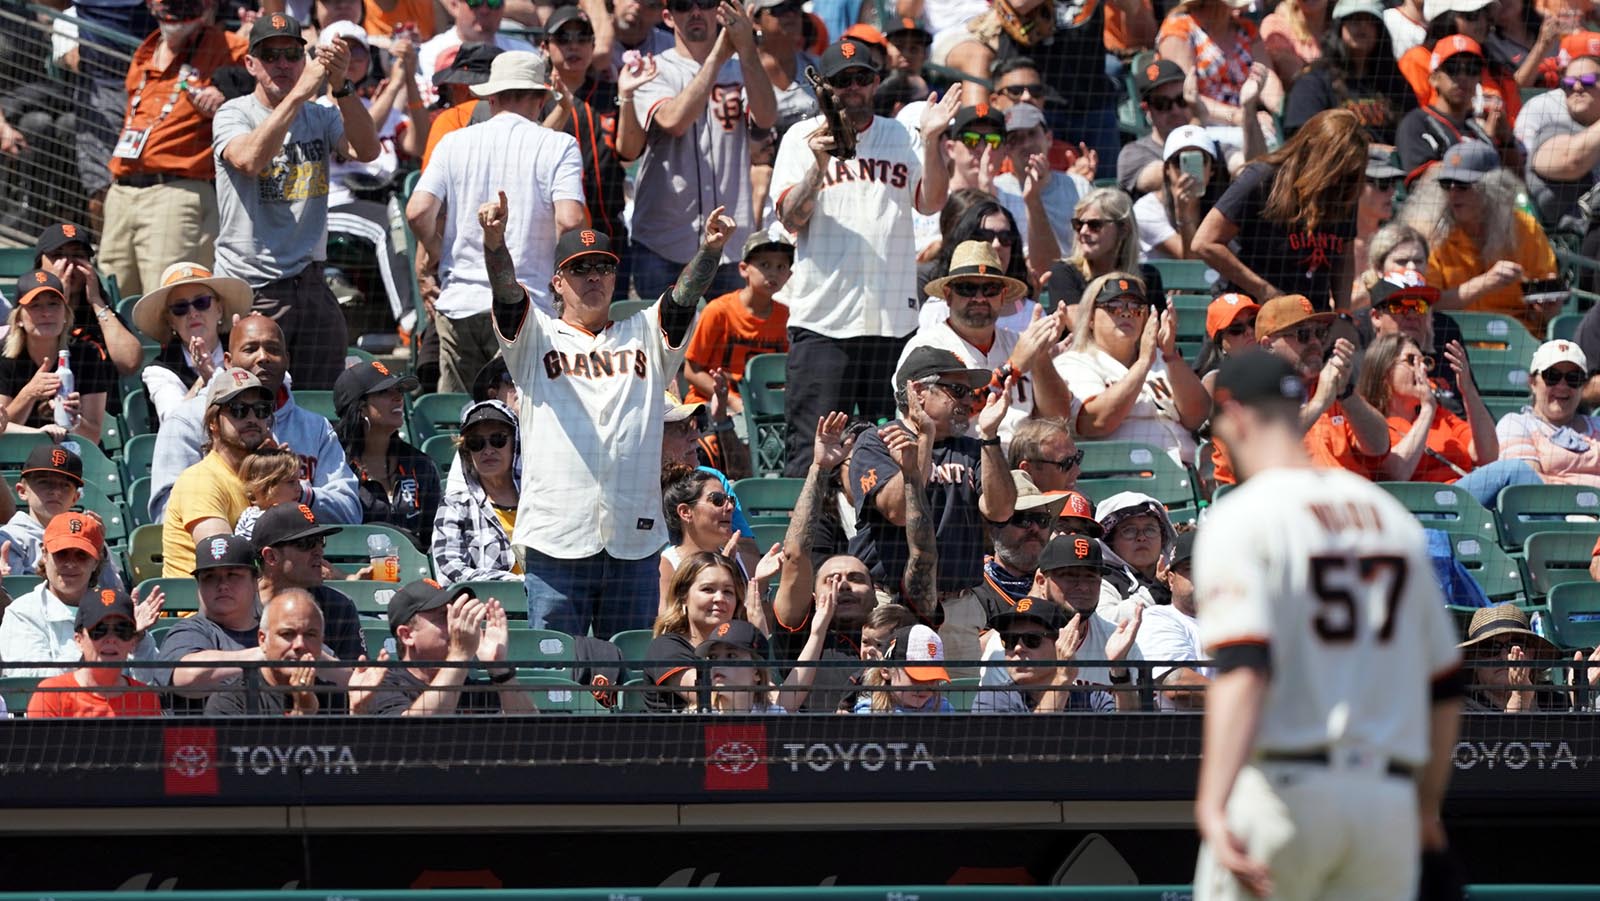 Giants, A's fans gain option to stream games on mobile apps